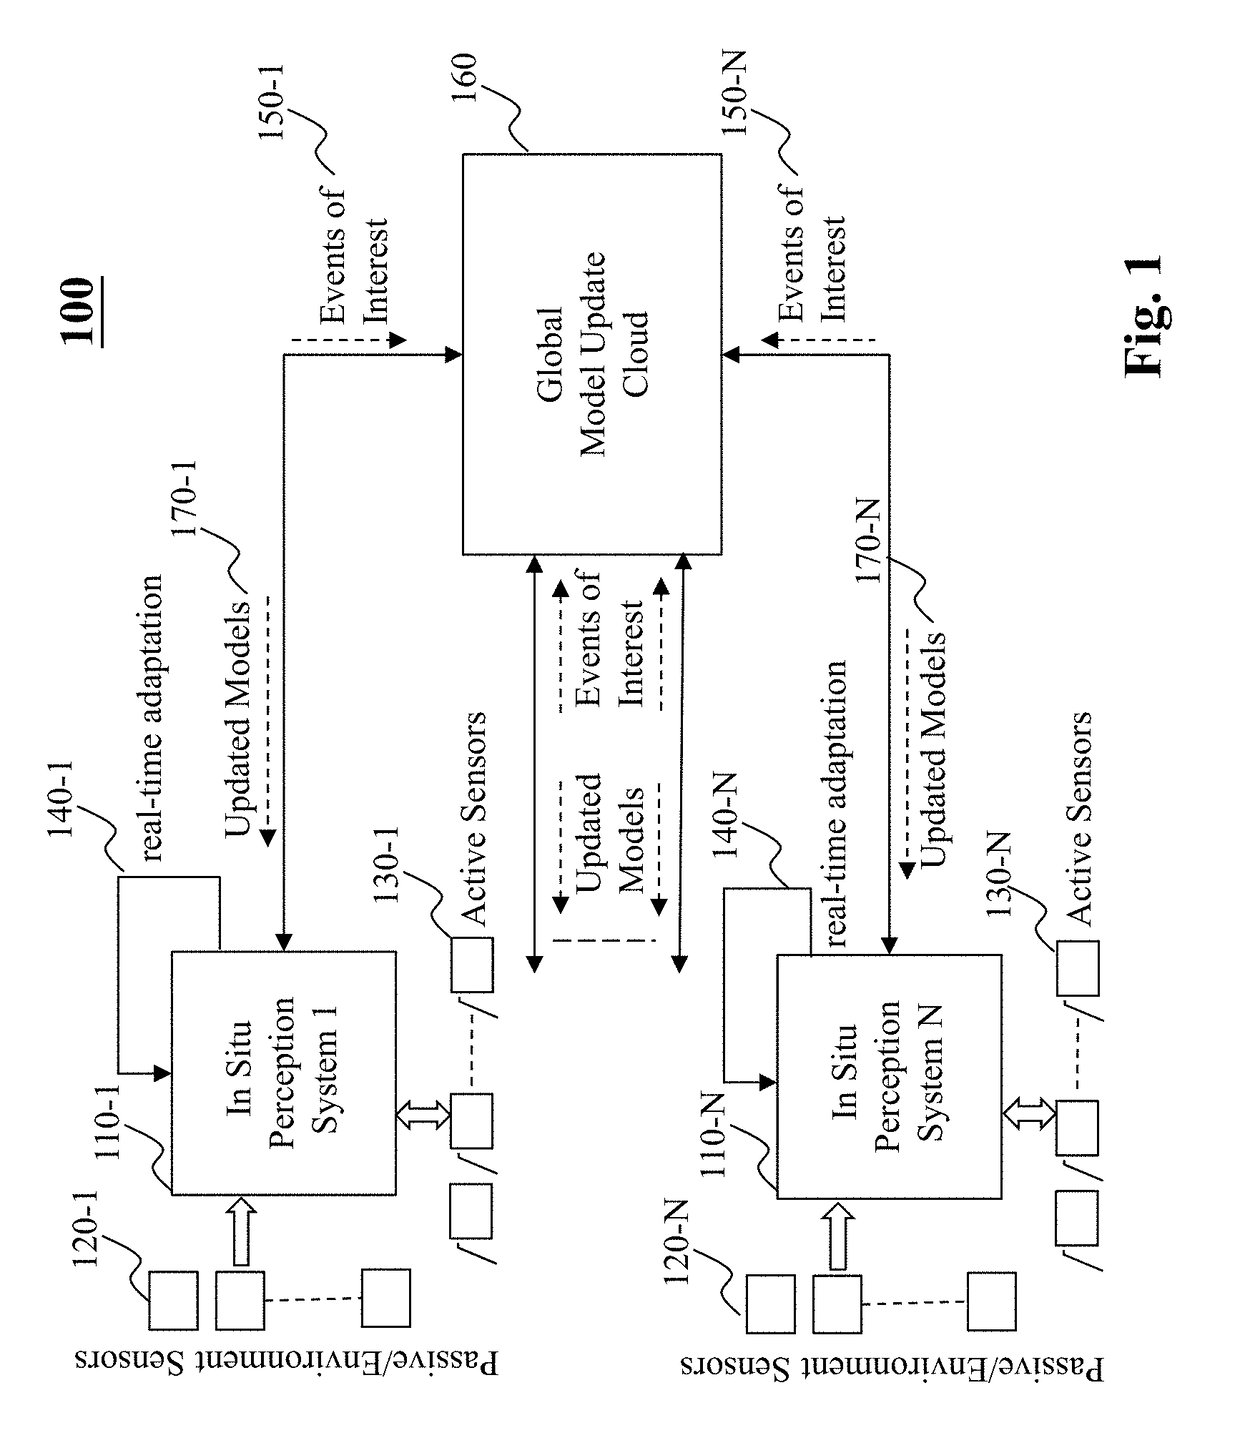 Method and system for object centric stereo via cross modality validation in autonomous driving vehicles